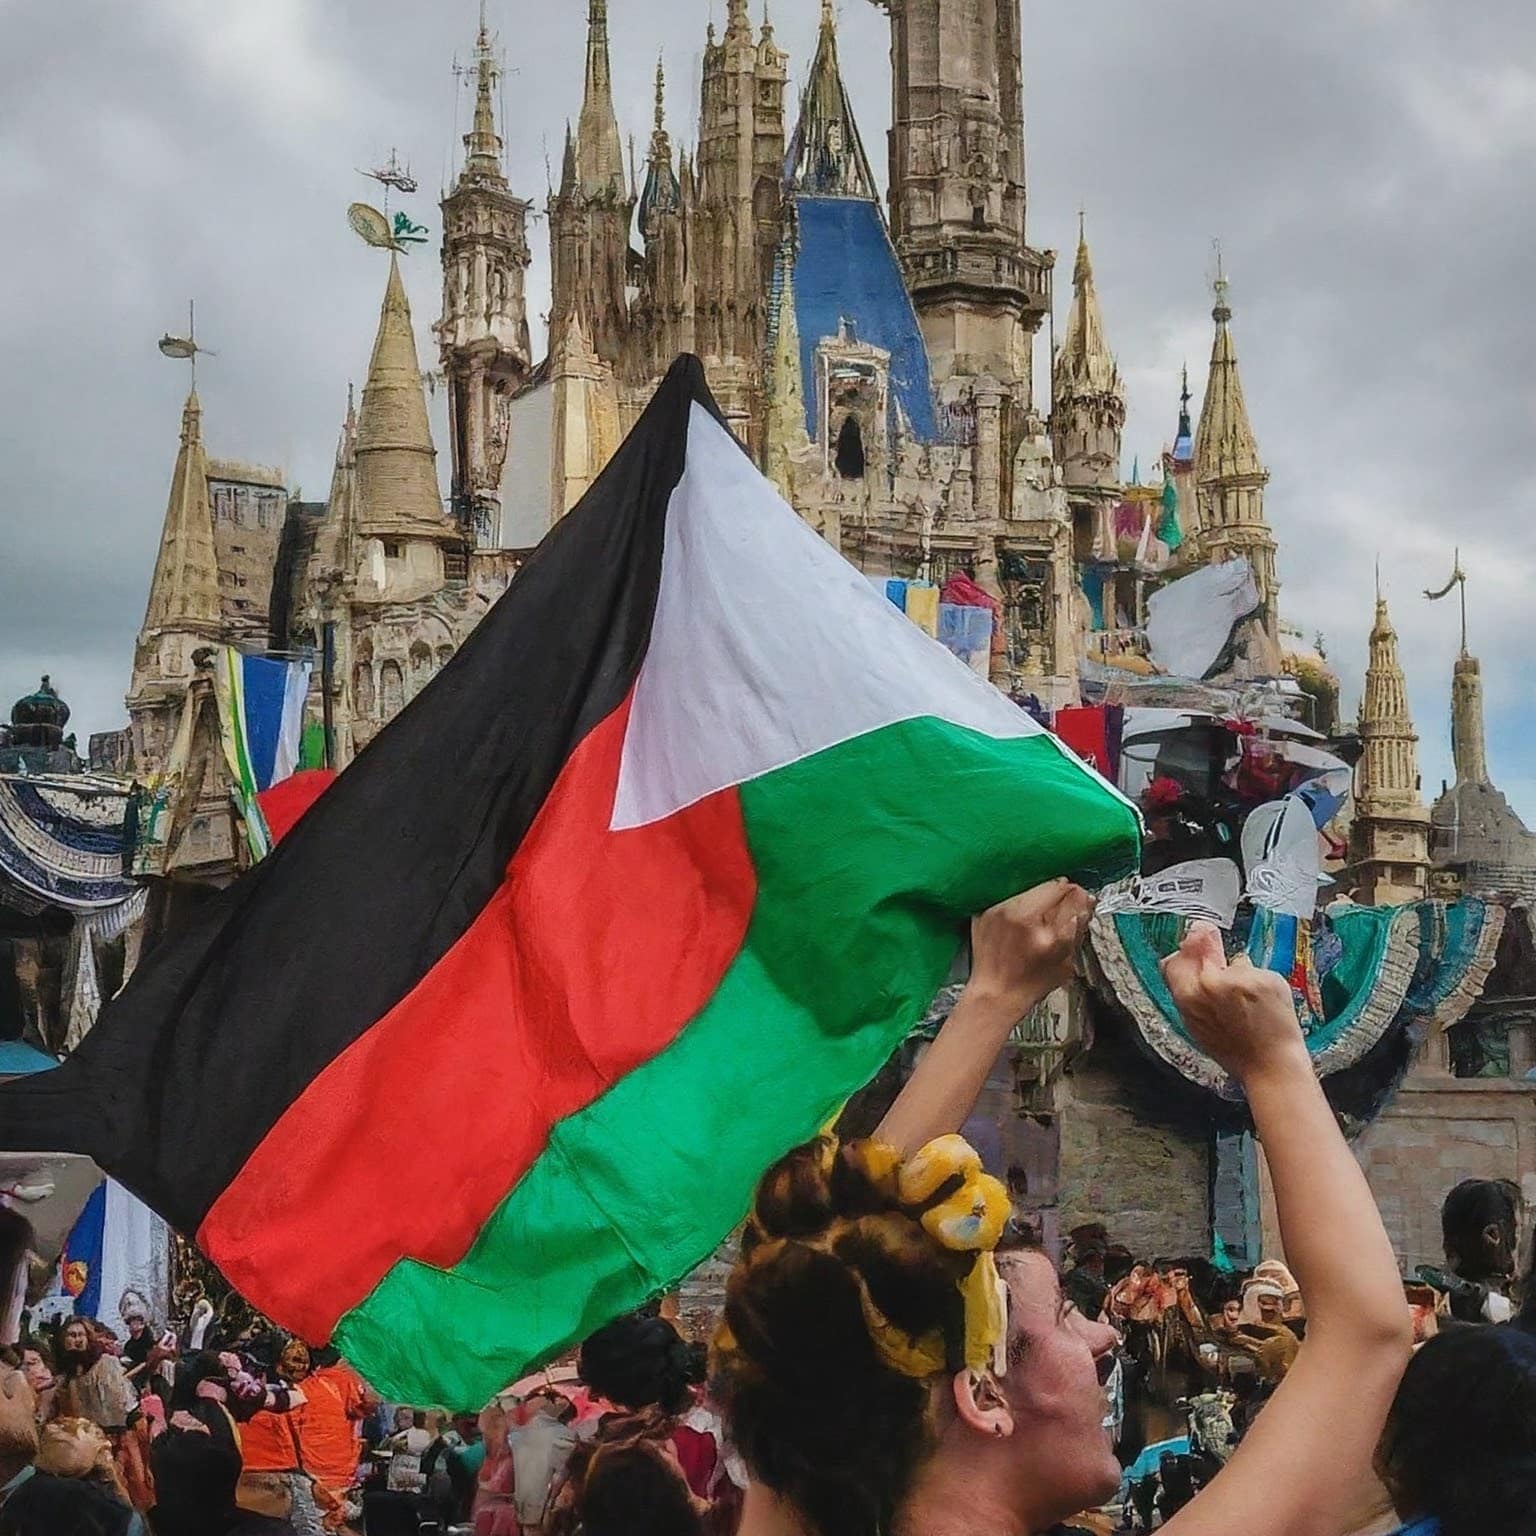 Queers for Palestine block exit to Disney World, infuriating drivers before they’re promptly arrested